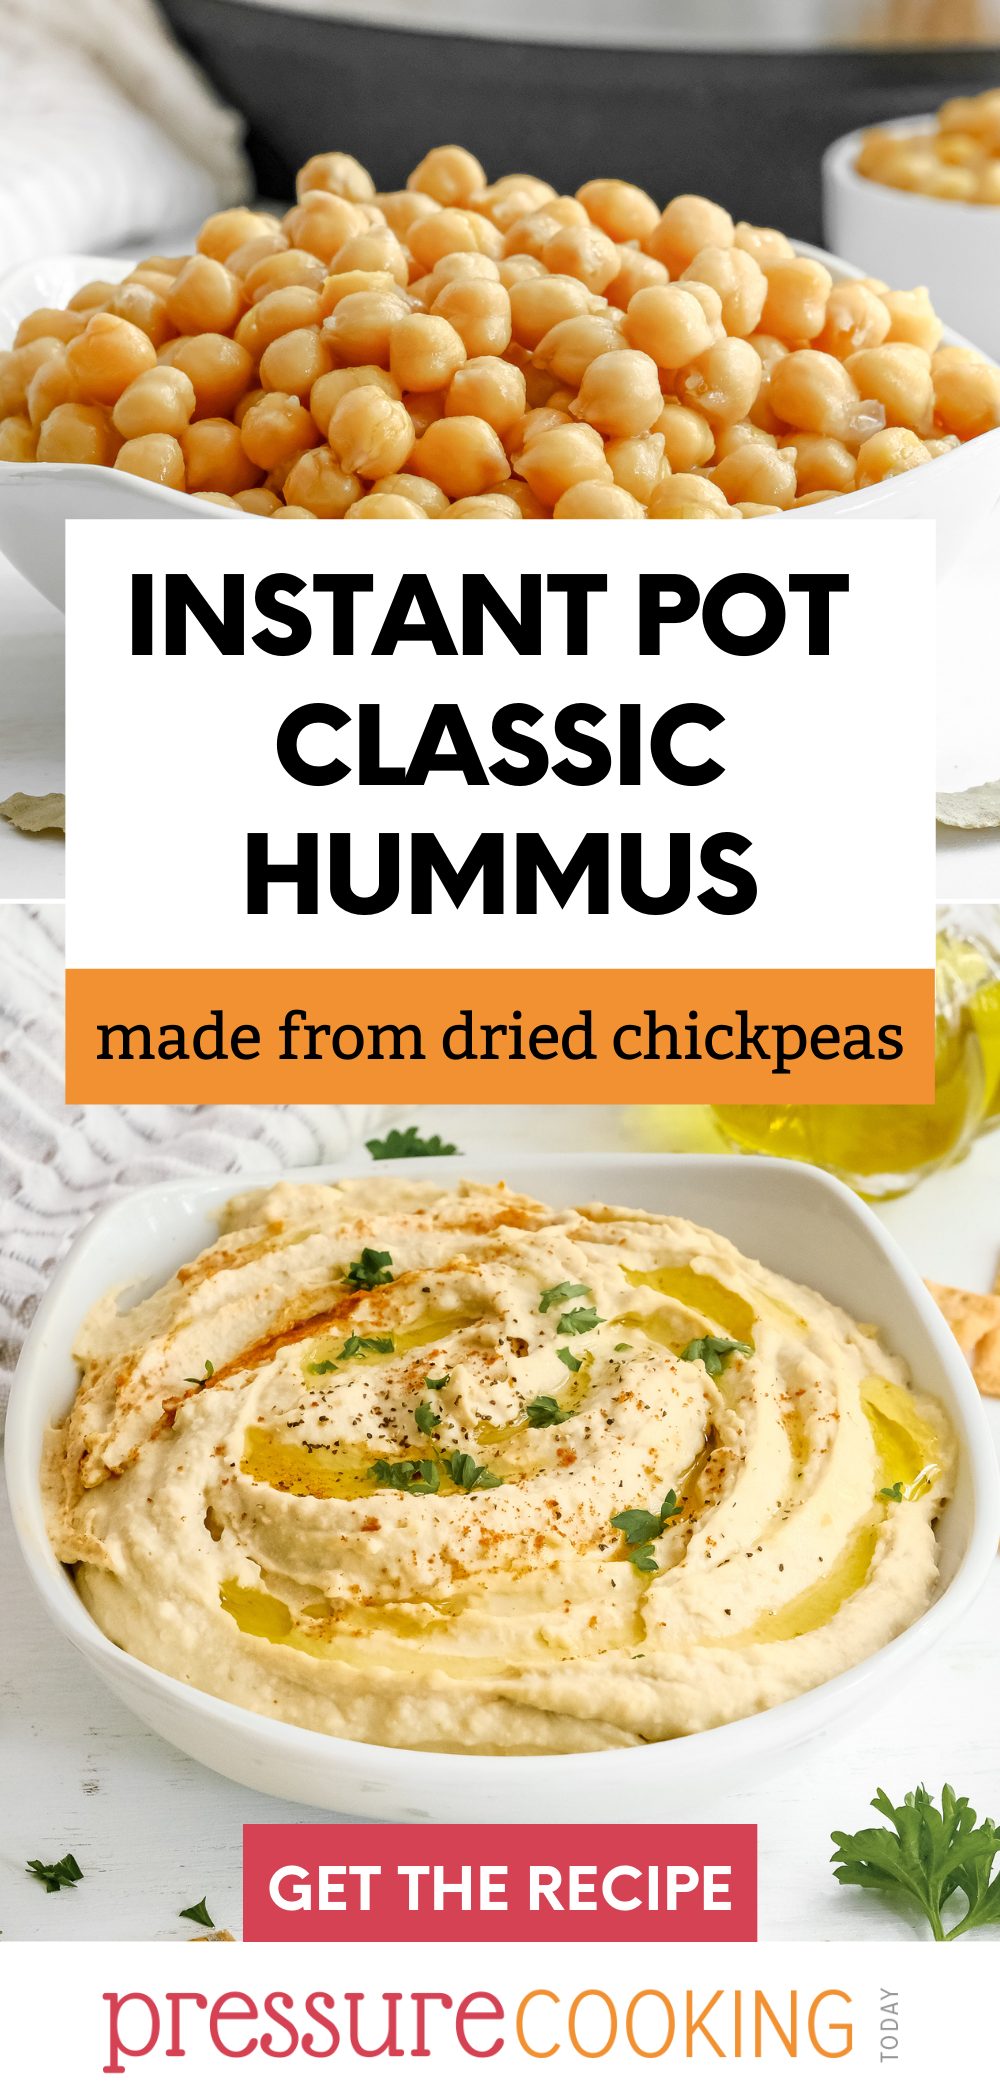 Pinterest image promoting Instant Pot hummus recipe; with a top image featuring a white bowl of cooked chickpeas and a bottom image featuring a 45 degree angle of a swirly bowl of cooked hummus, finished with oil, spices, and green parsley via @PressureCook2da